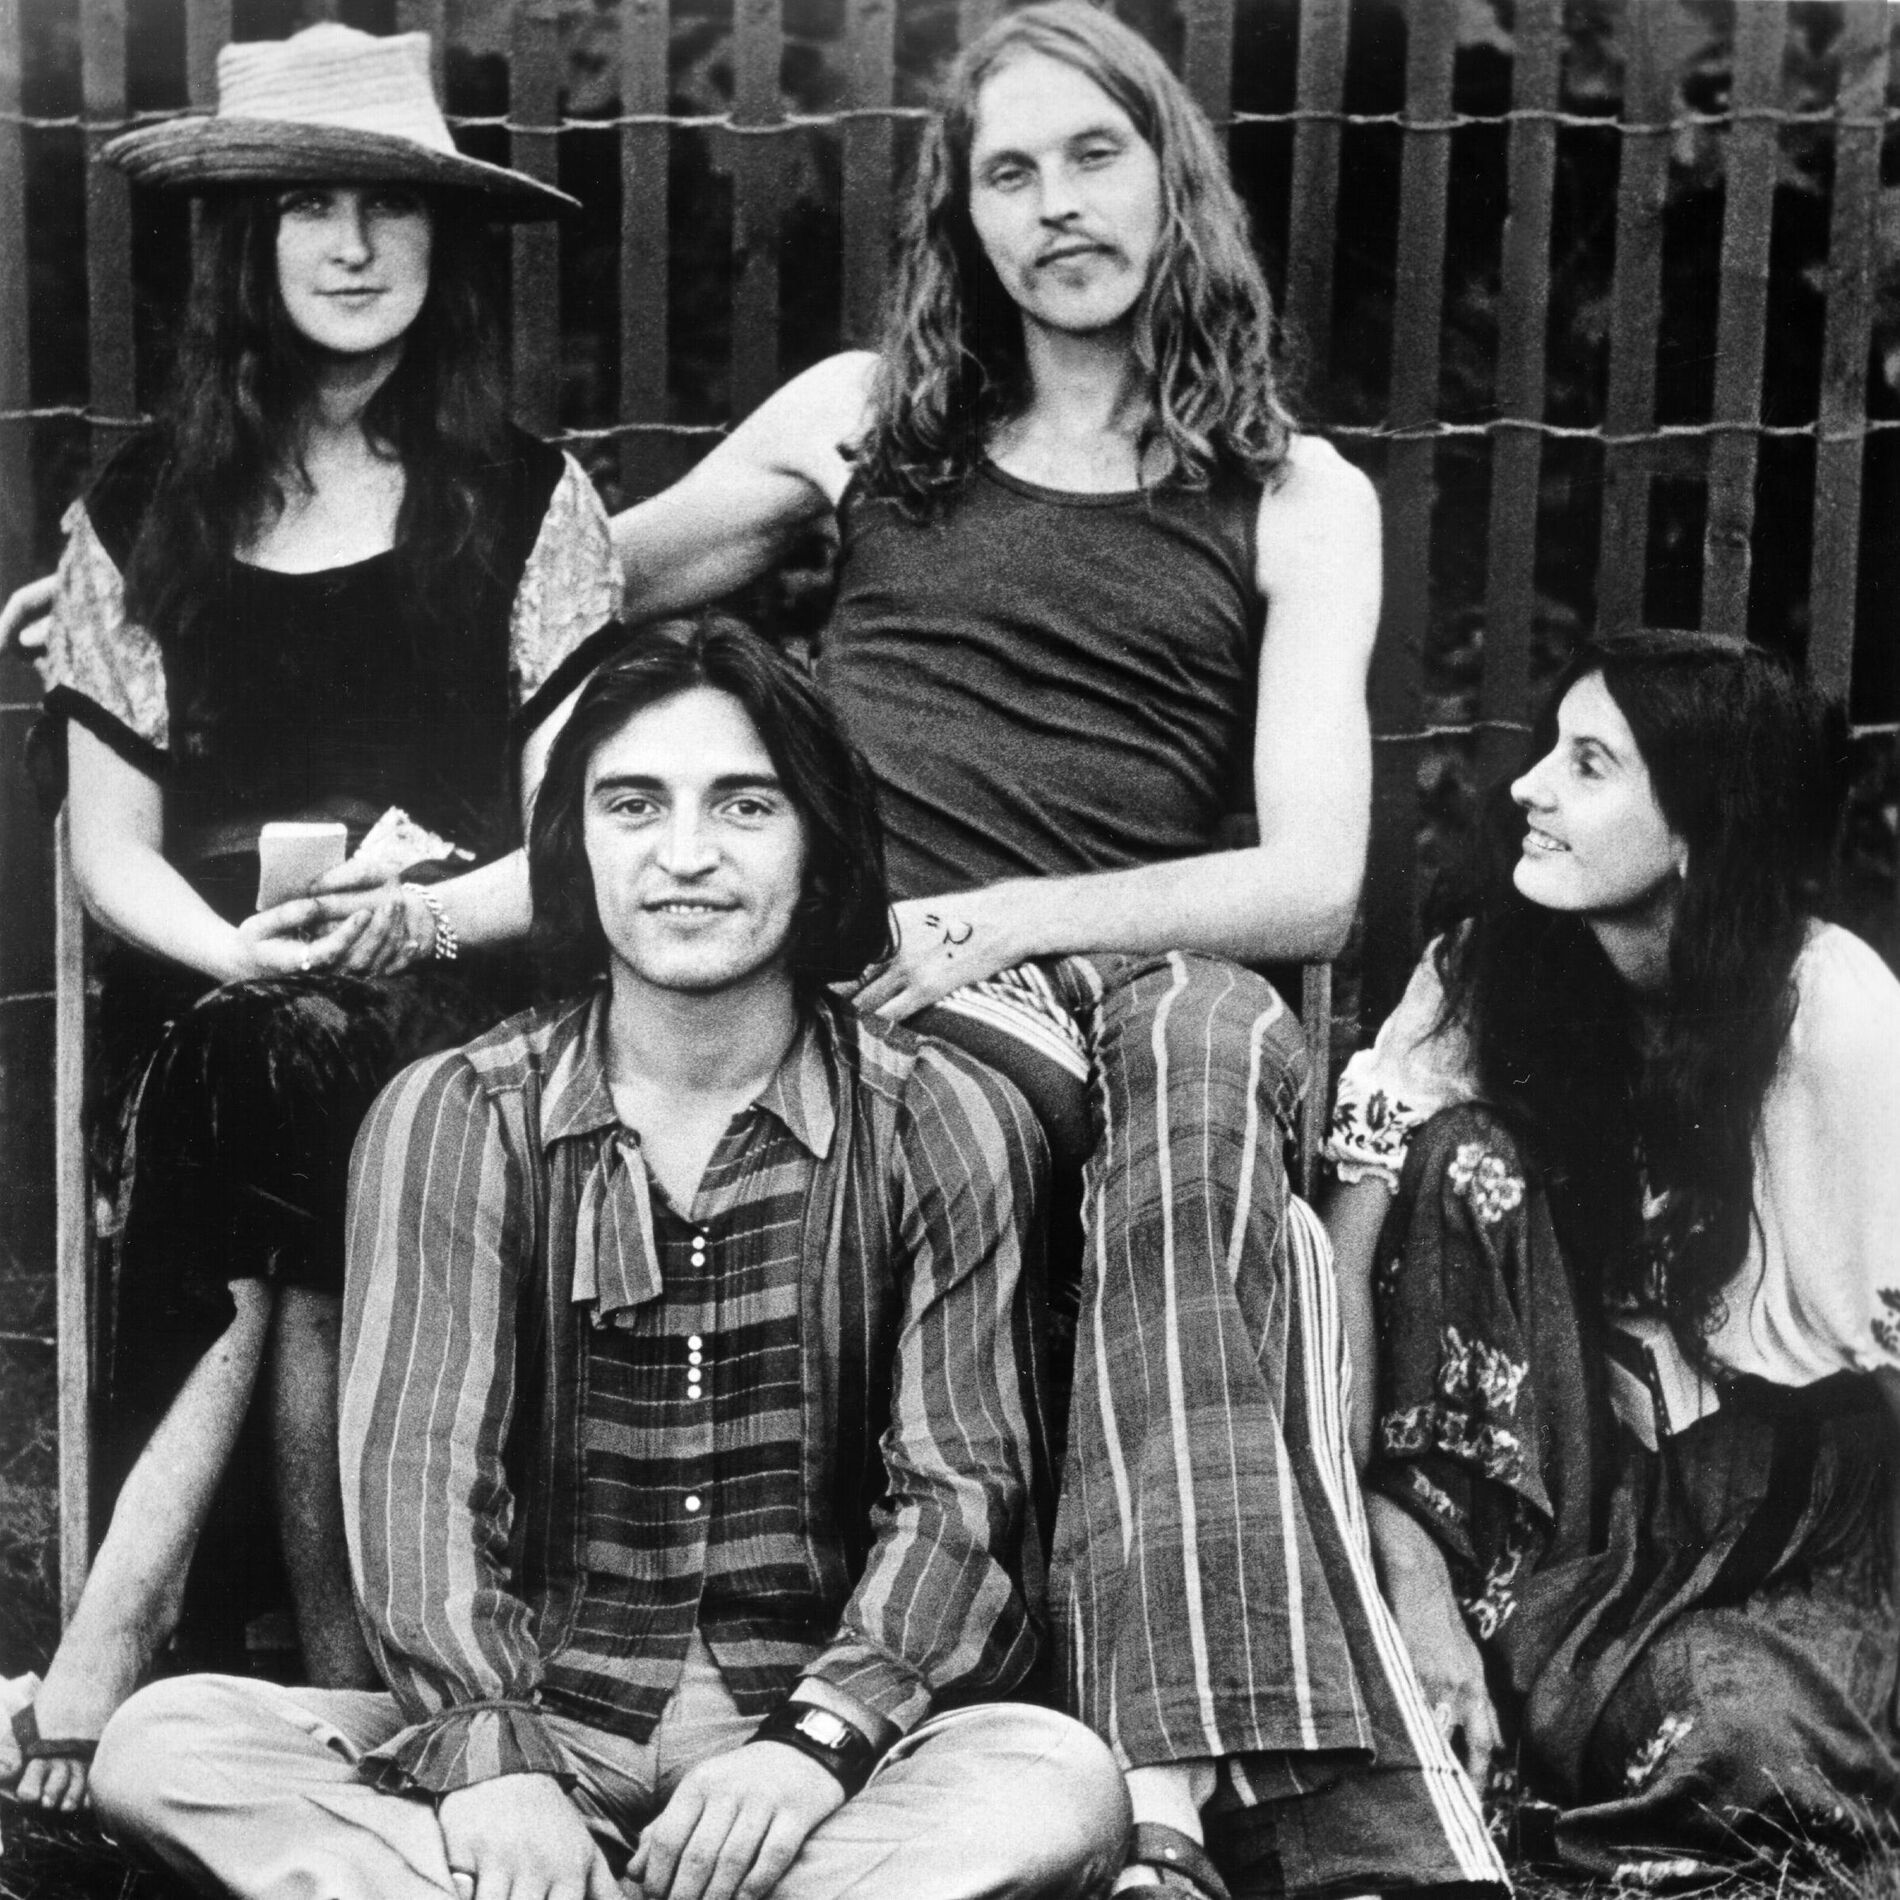 The Incredible String Band: albums, songs, playlists | Listen on 